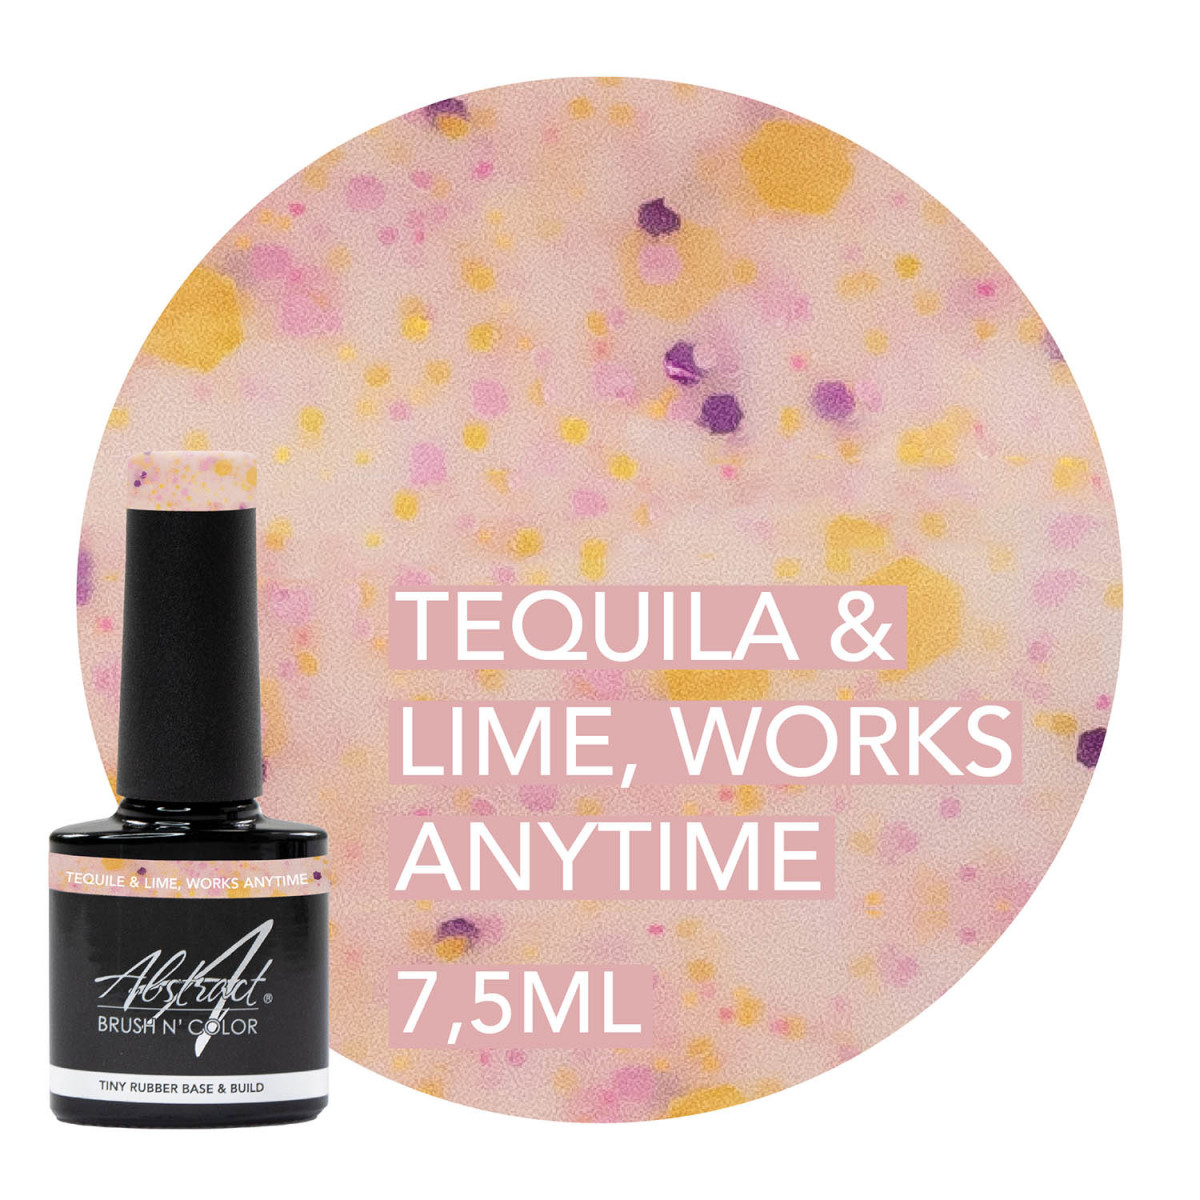 Tequila and Lime works anytime - TINY Rubber Base & Build Gel Abstract